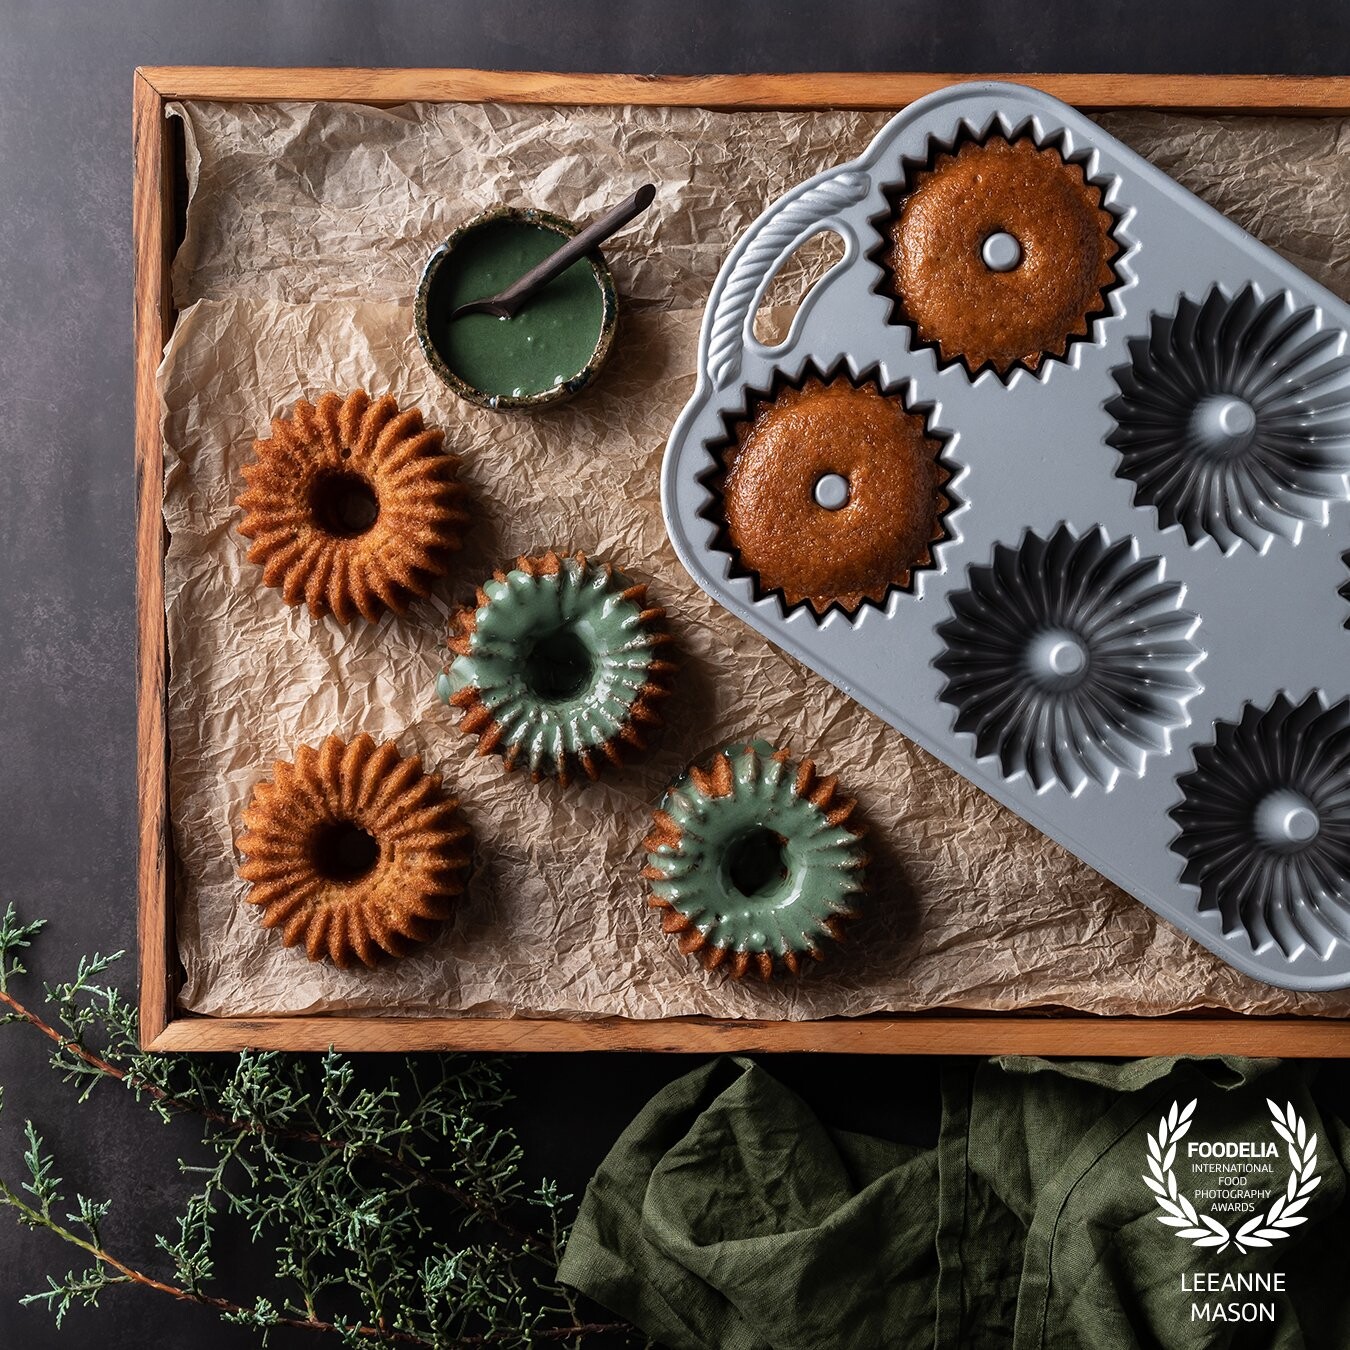 I wanted to show the texture of these adorable mini bundt cakes by using a high side light and then mixed the icing to a similar green colour as the linen and foilage.  The wooden tray served as a frame for the pan and hero food.